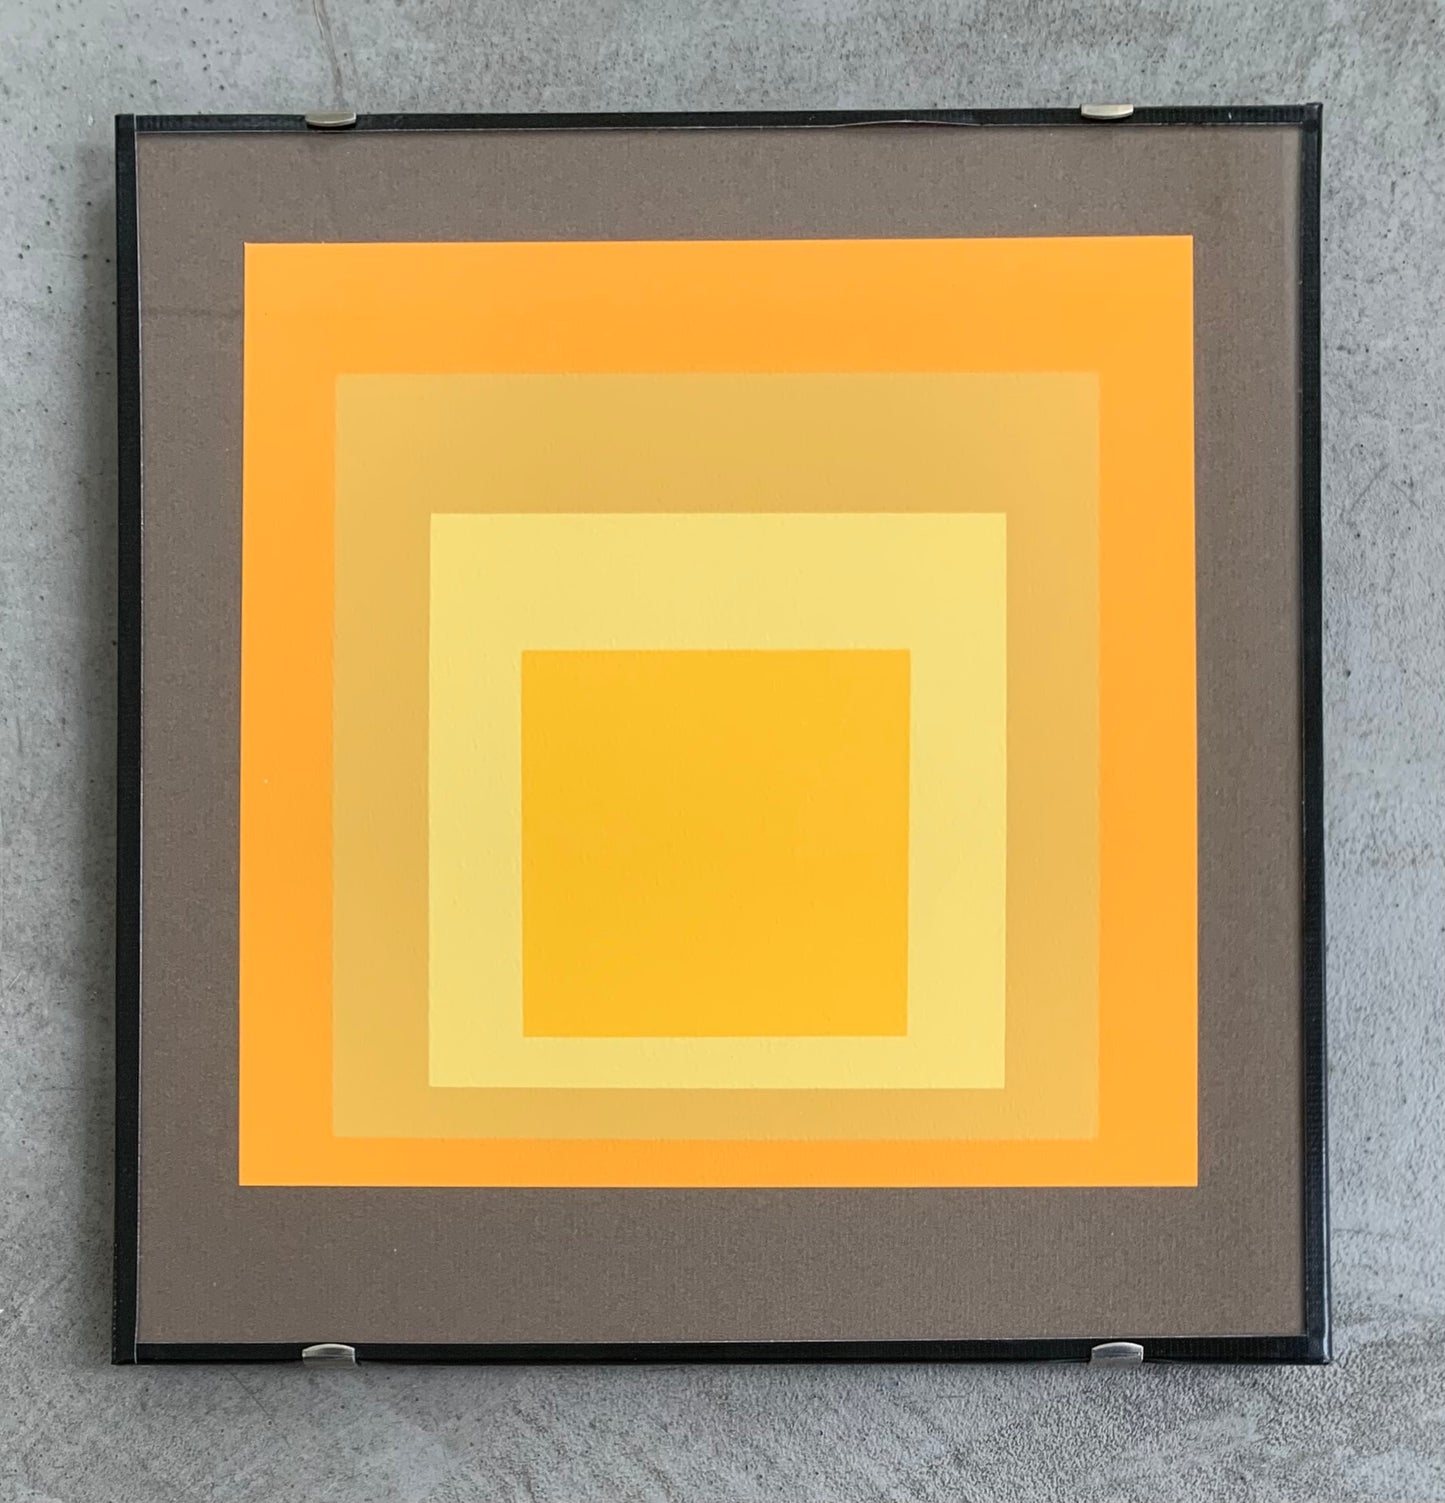 Josef Albers. “Hommage to the Square”,1960’s